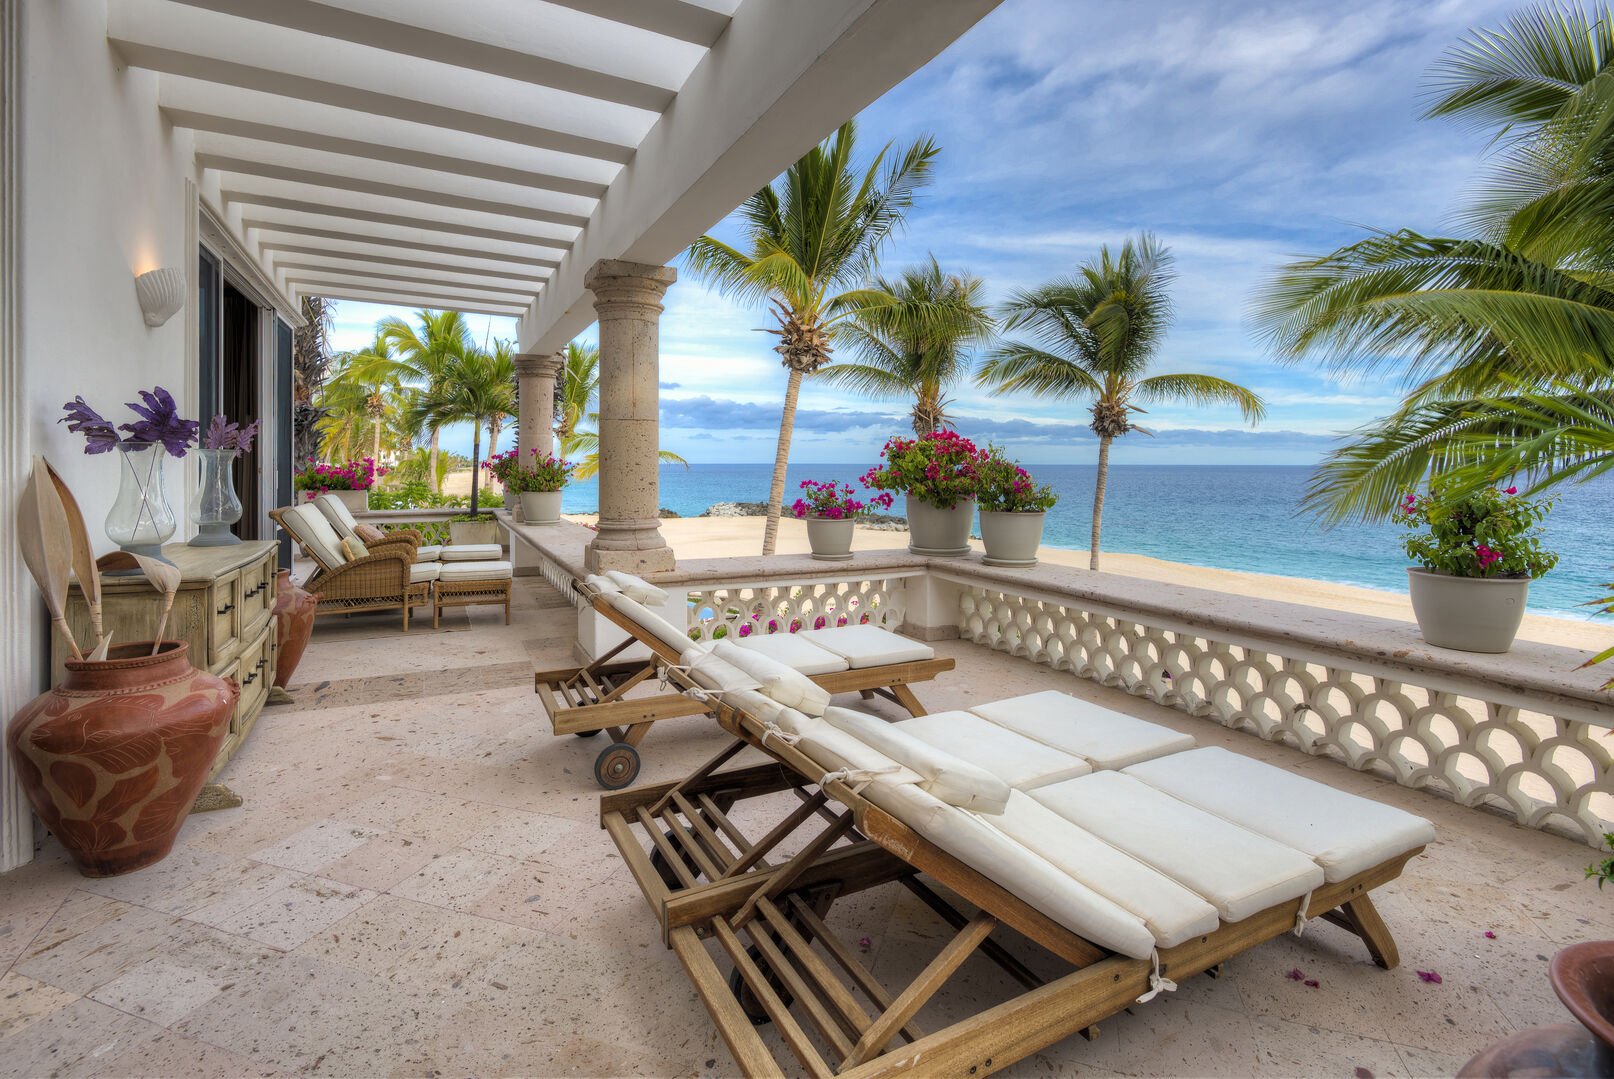 Large beachfront balcony with chaise lounges